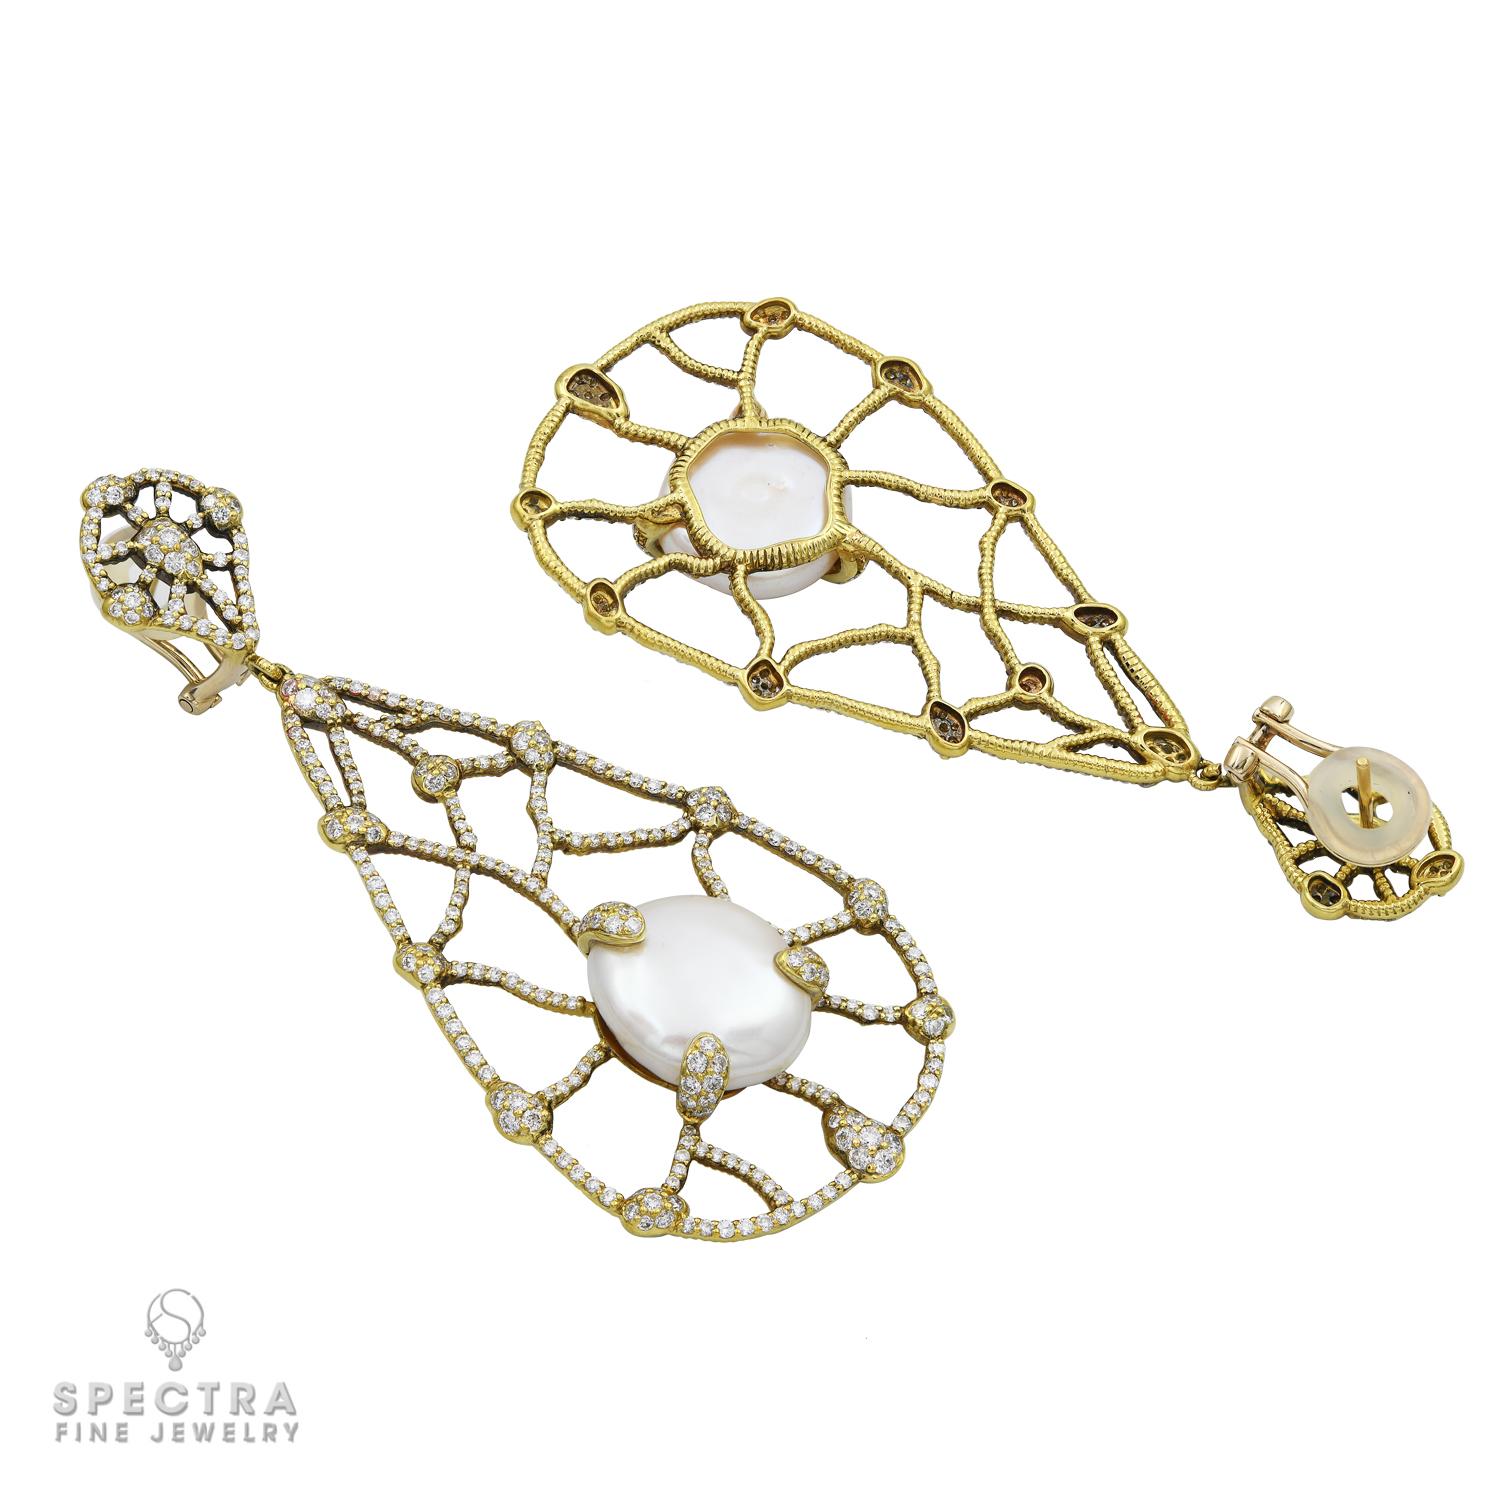 There is something organic, almost leaf-like about these Judith Ripka Pearl Diamond Drop Chandelier Earrings, highlighting just the veins of the leaf minus the green, just the structure or lifeforce of the leaf that transports water, nutrients, and